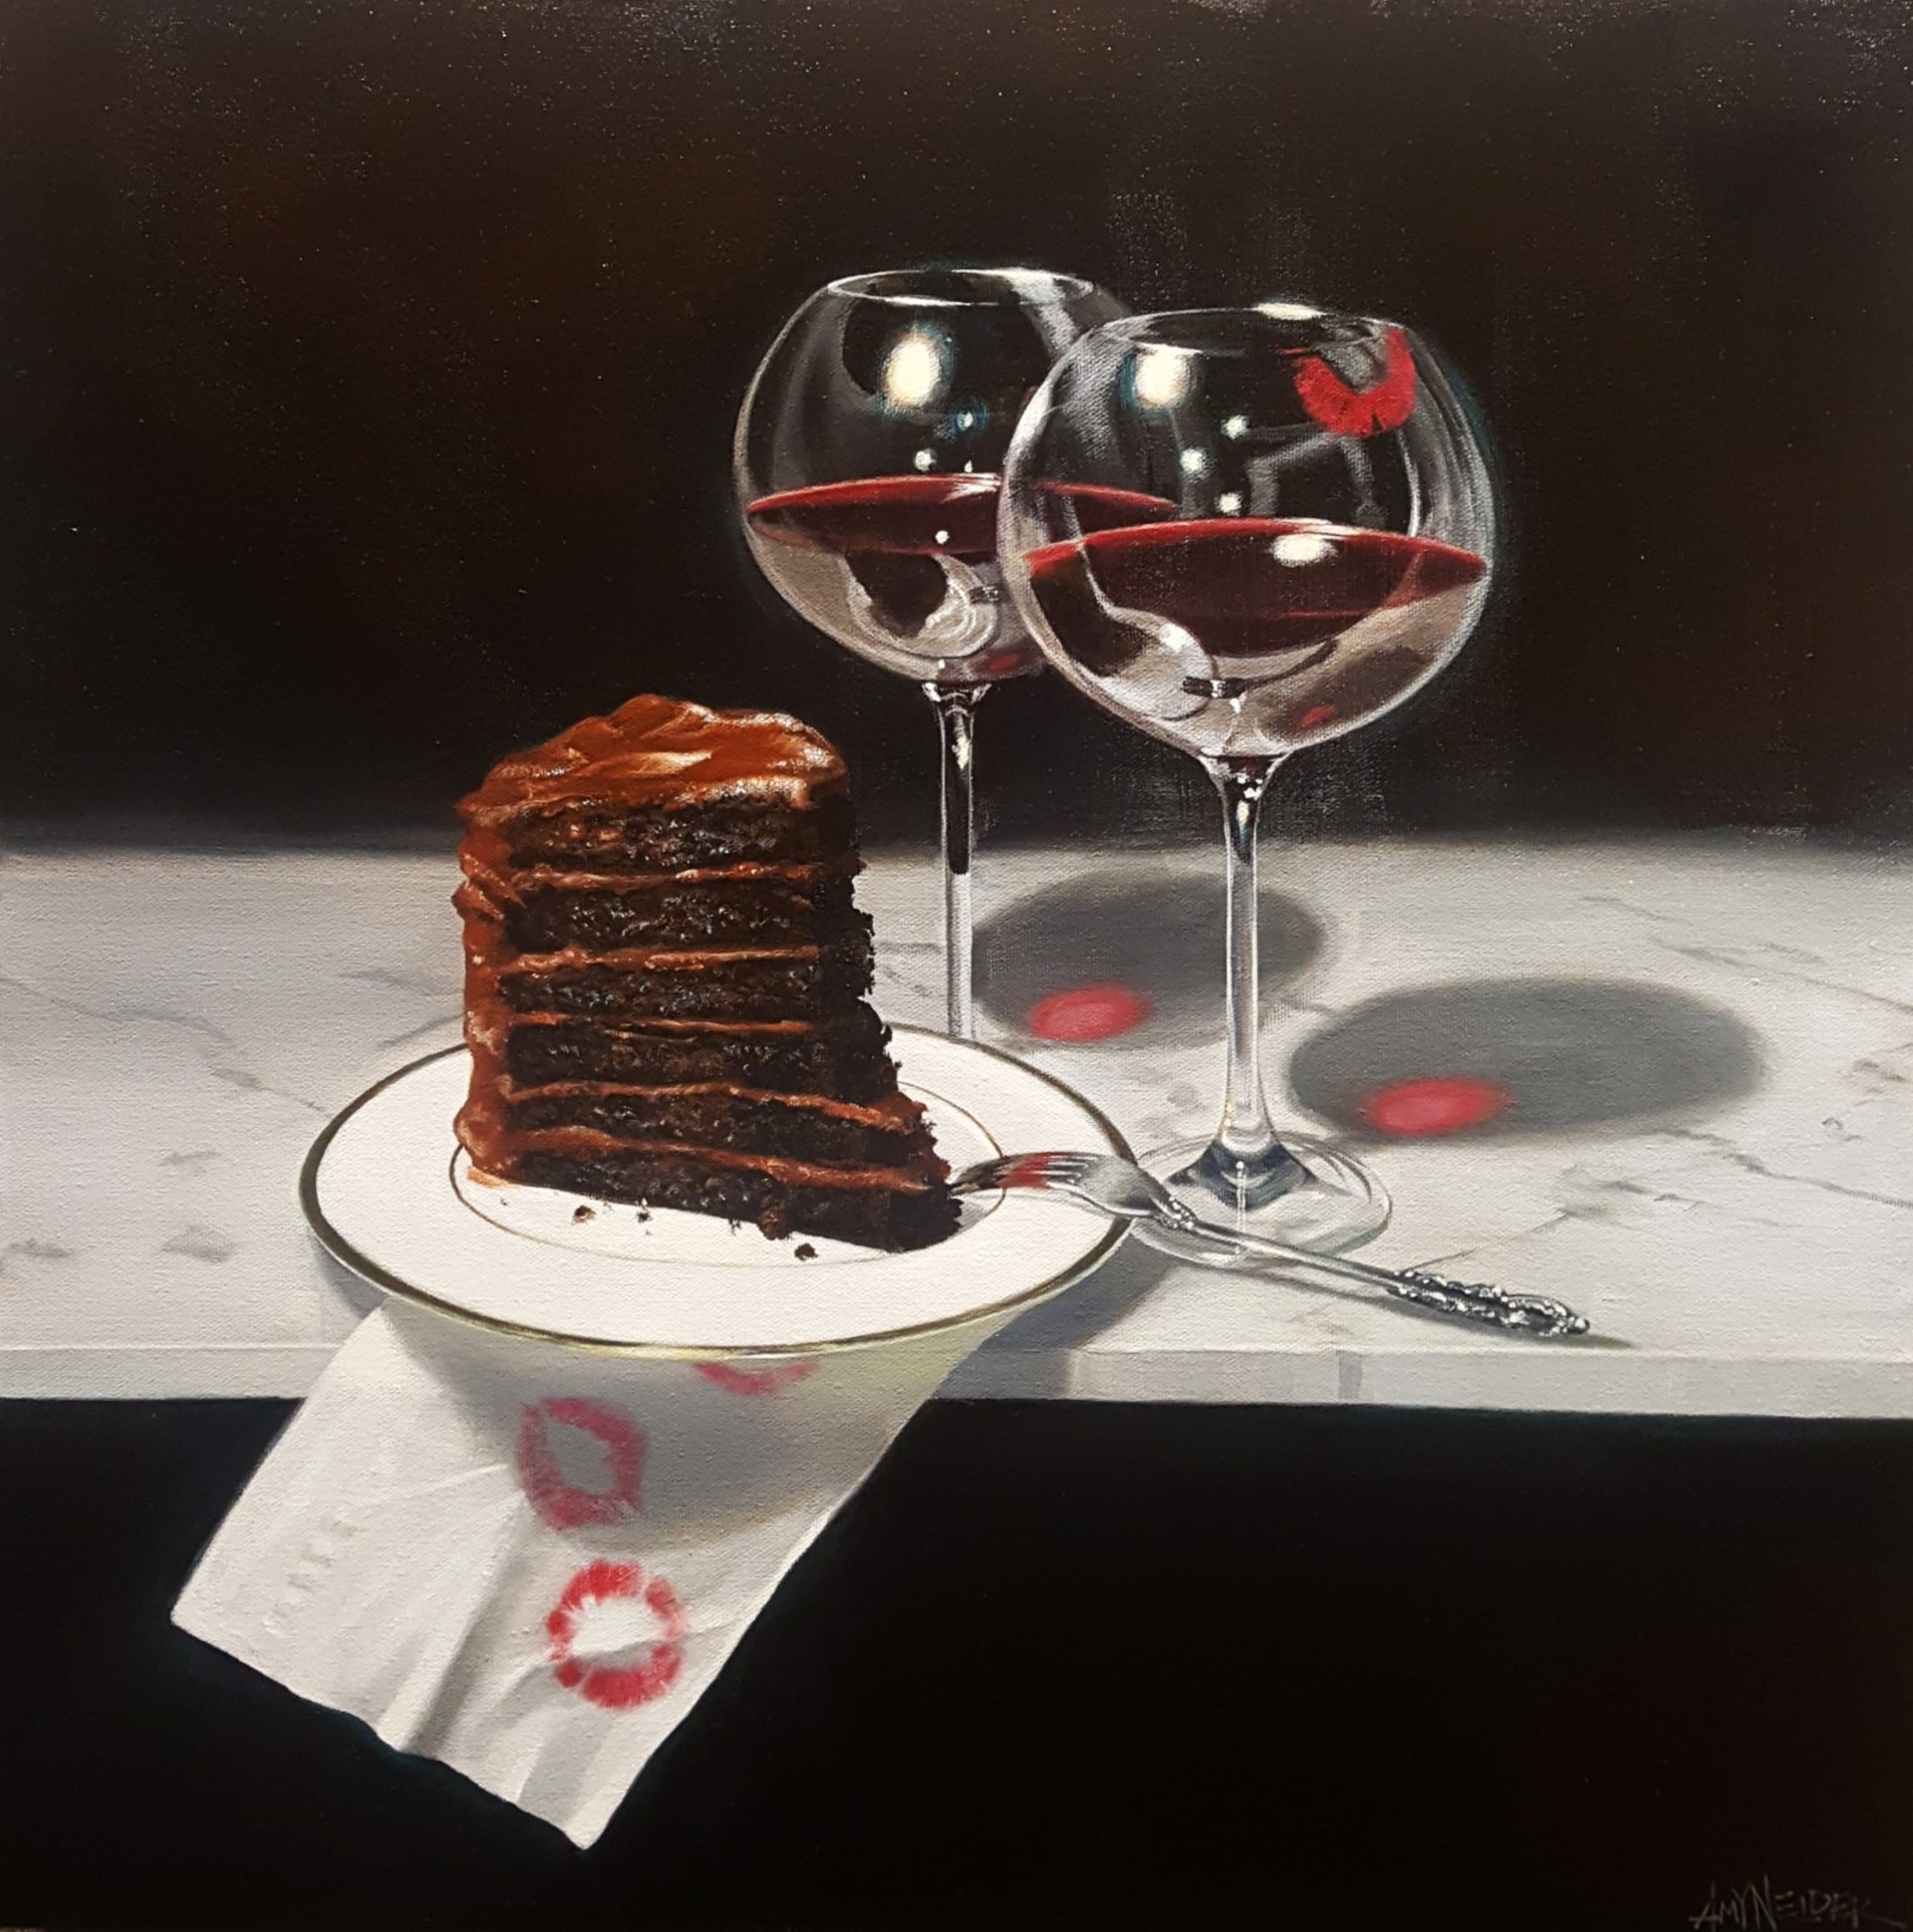 Chocolate, Interrupted Again by Amy Nelder